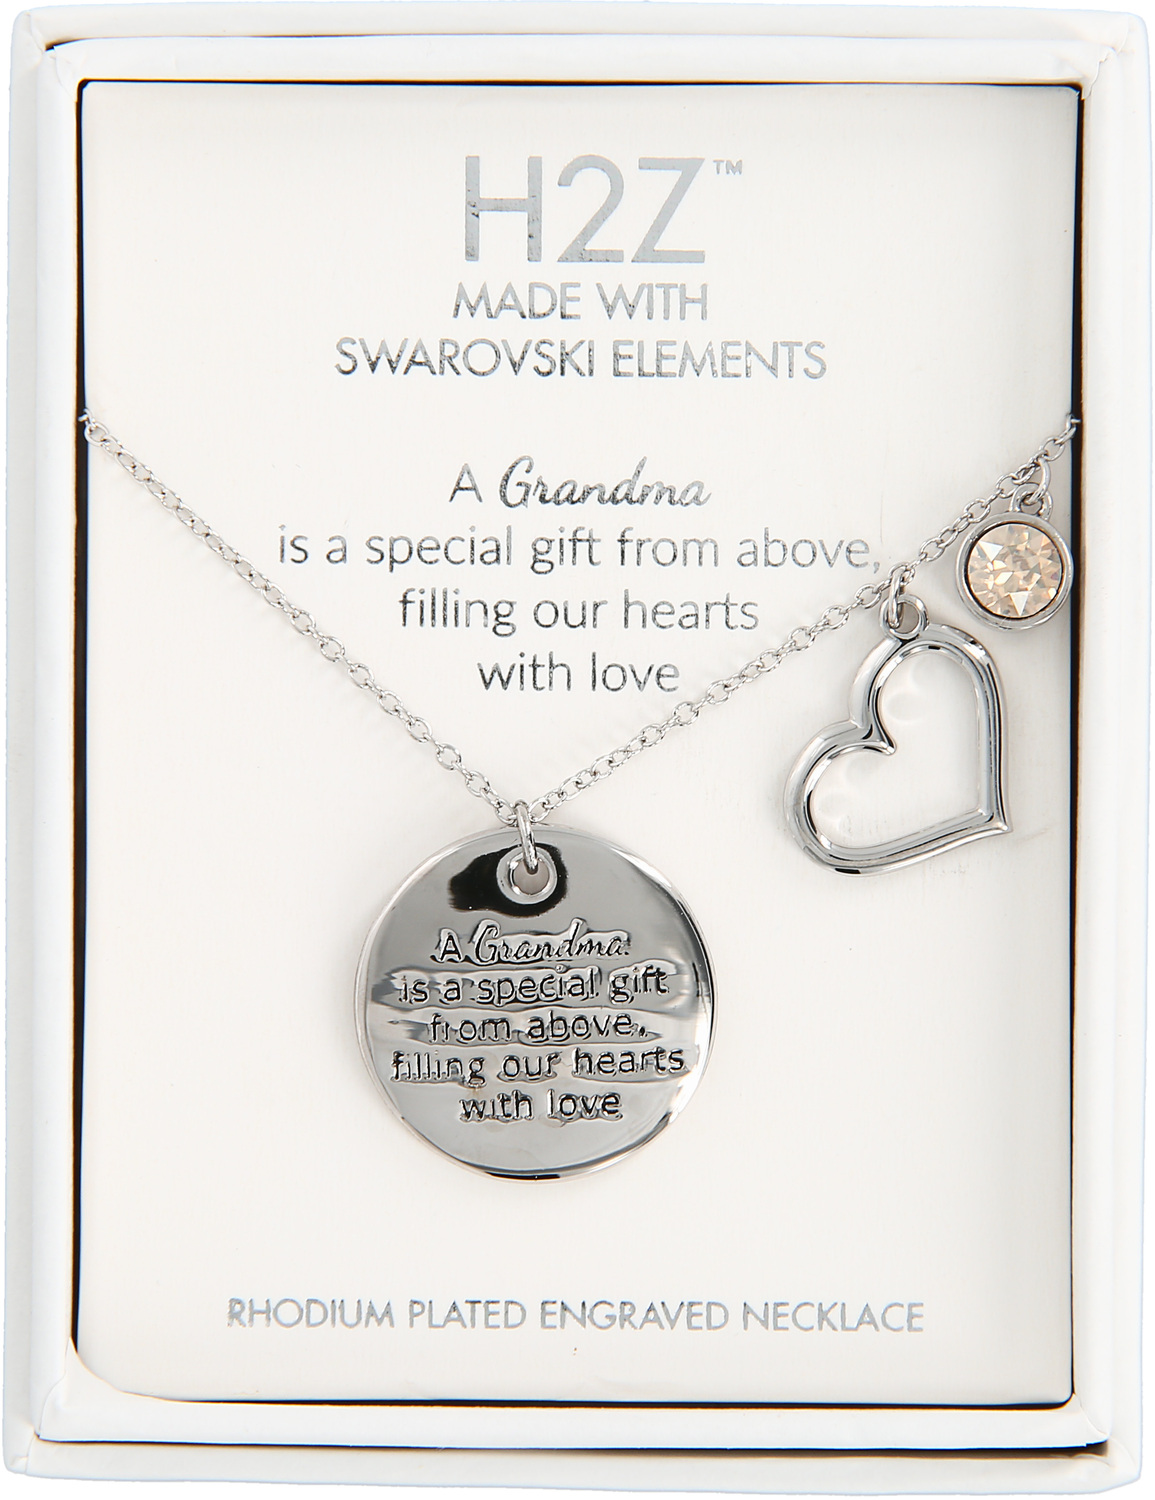 Grandma 
Golden Shadow Crystal by H2Z Made with Swarovski Elements - Grandma 
Golden Shadow Crystal - 16.5"-20.5" Engraved Rhodium Plated Austrian Element Necklace